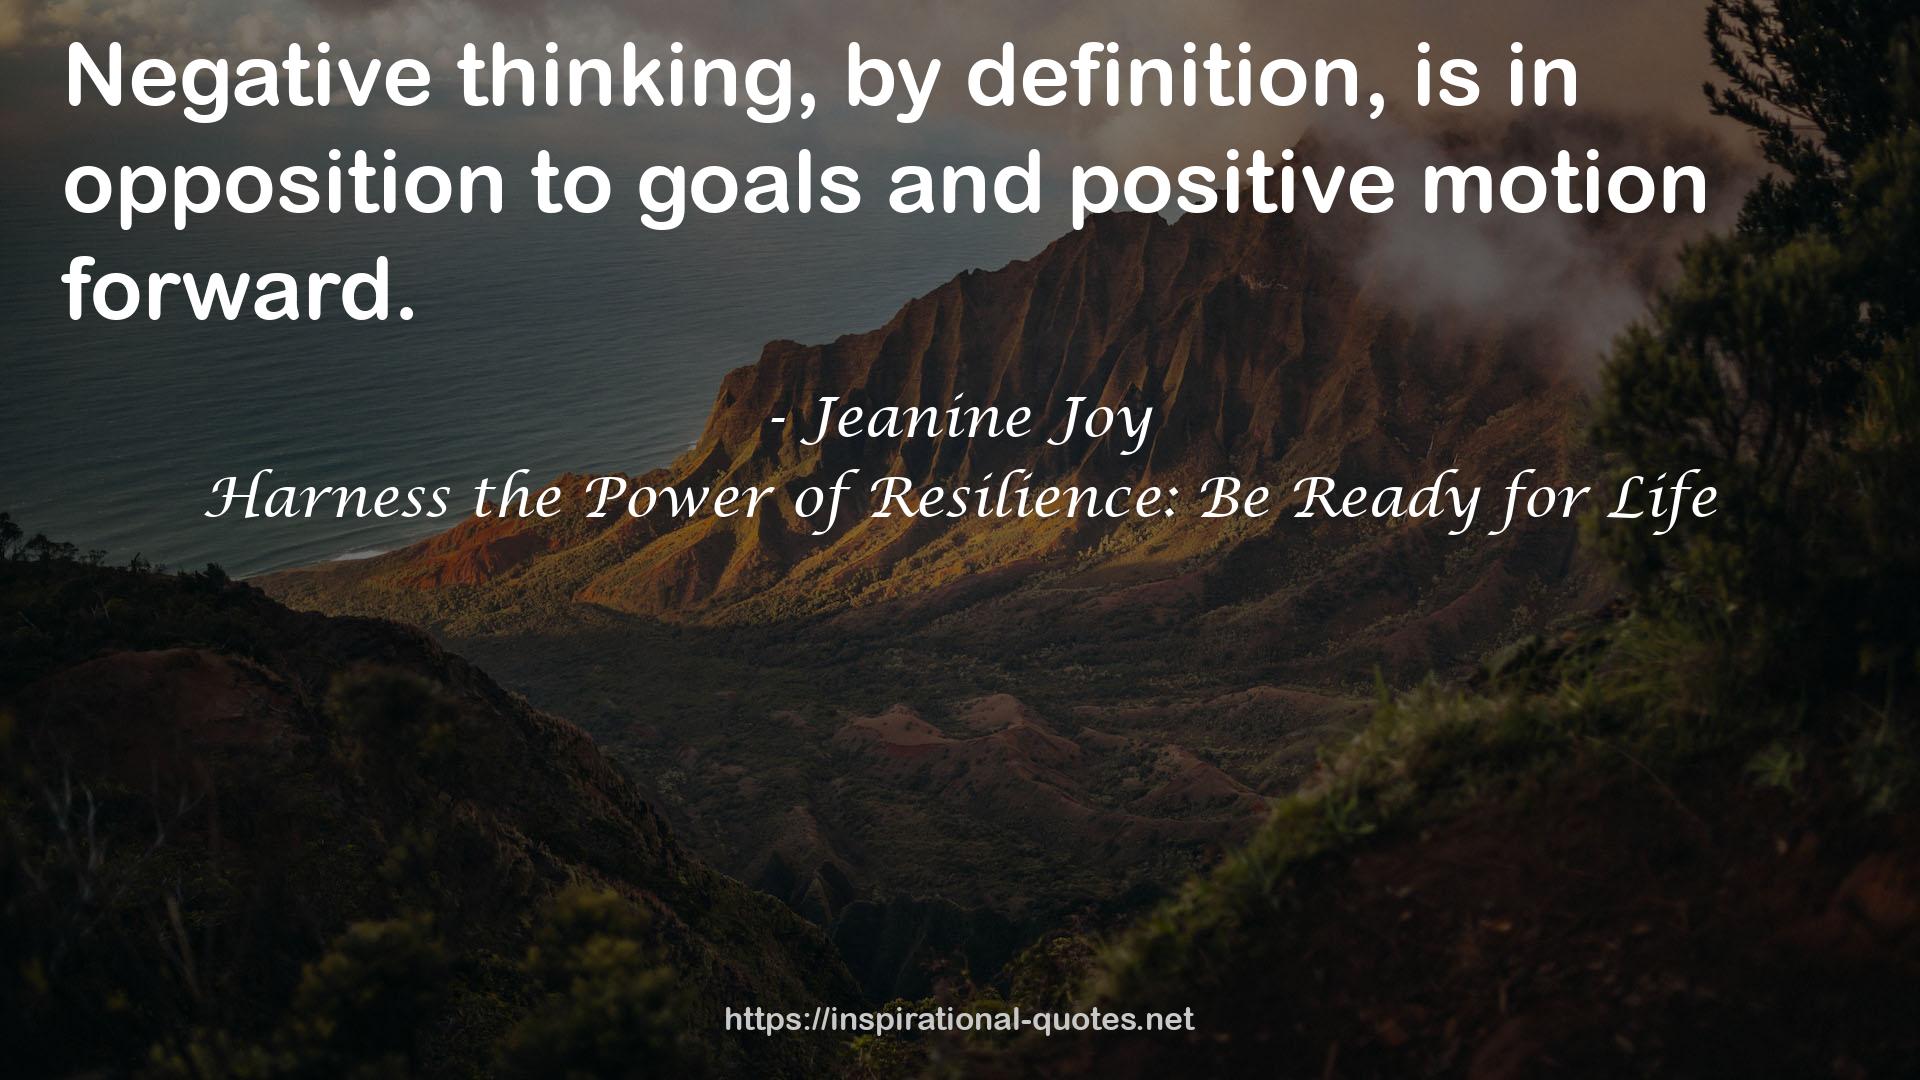 Harness the Power of Resilience: Be Ready for Life QUOTES